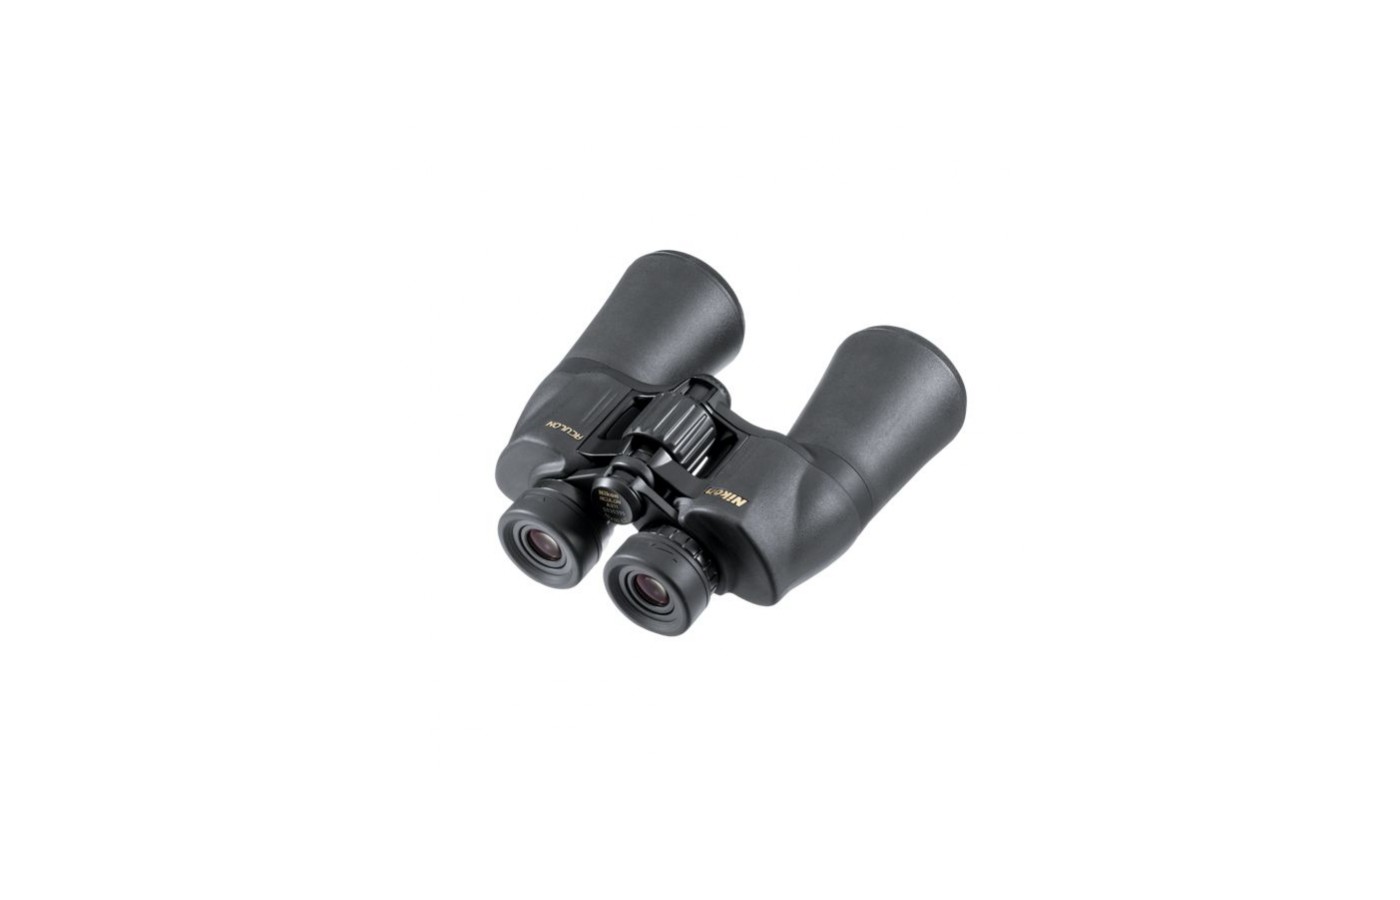 The Nikon Aculon A211 oppers aspherical eye pieces in order to reduce image distortion.